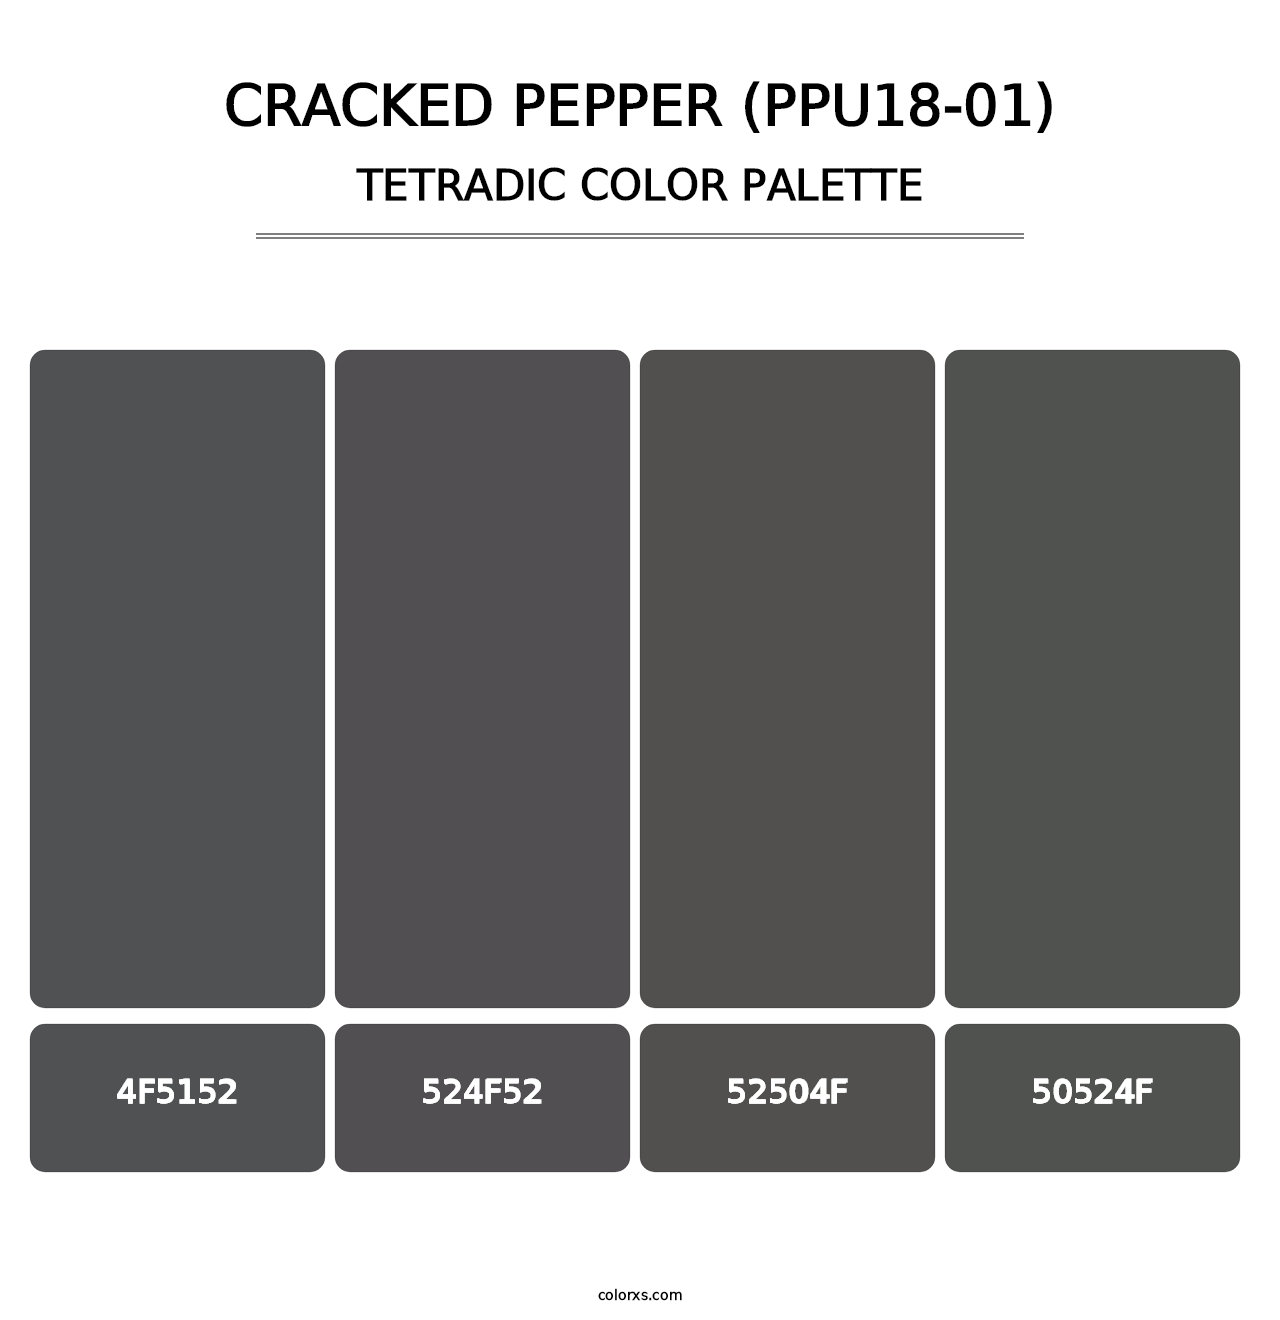 Cracked Pepper (PPU18-01) - Tetradic Color Palette